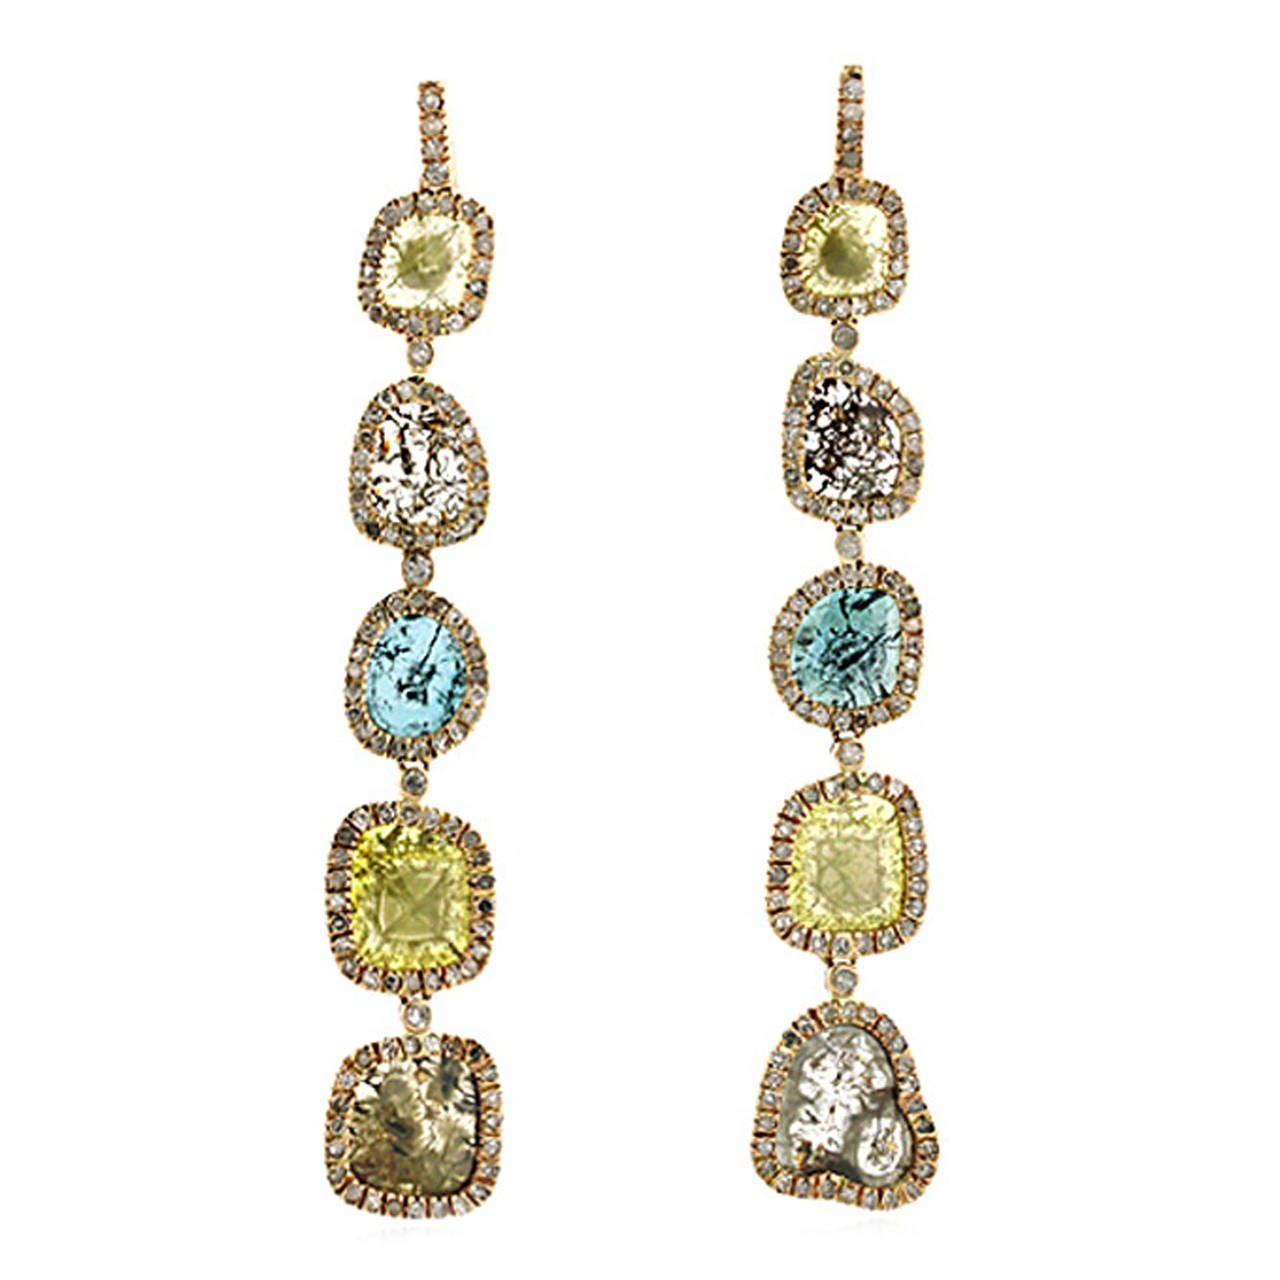 Majestic Looking Multicolor Sliced Diamond Gold Dangle Earrings at 1stdibs